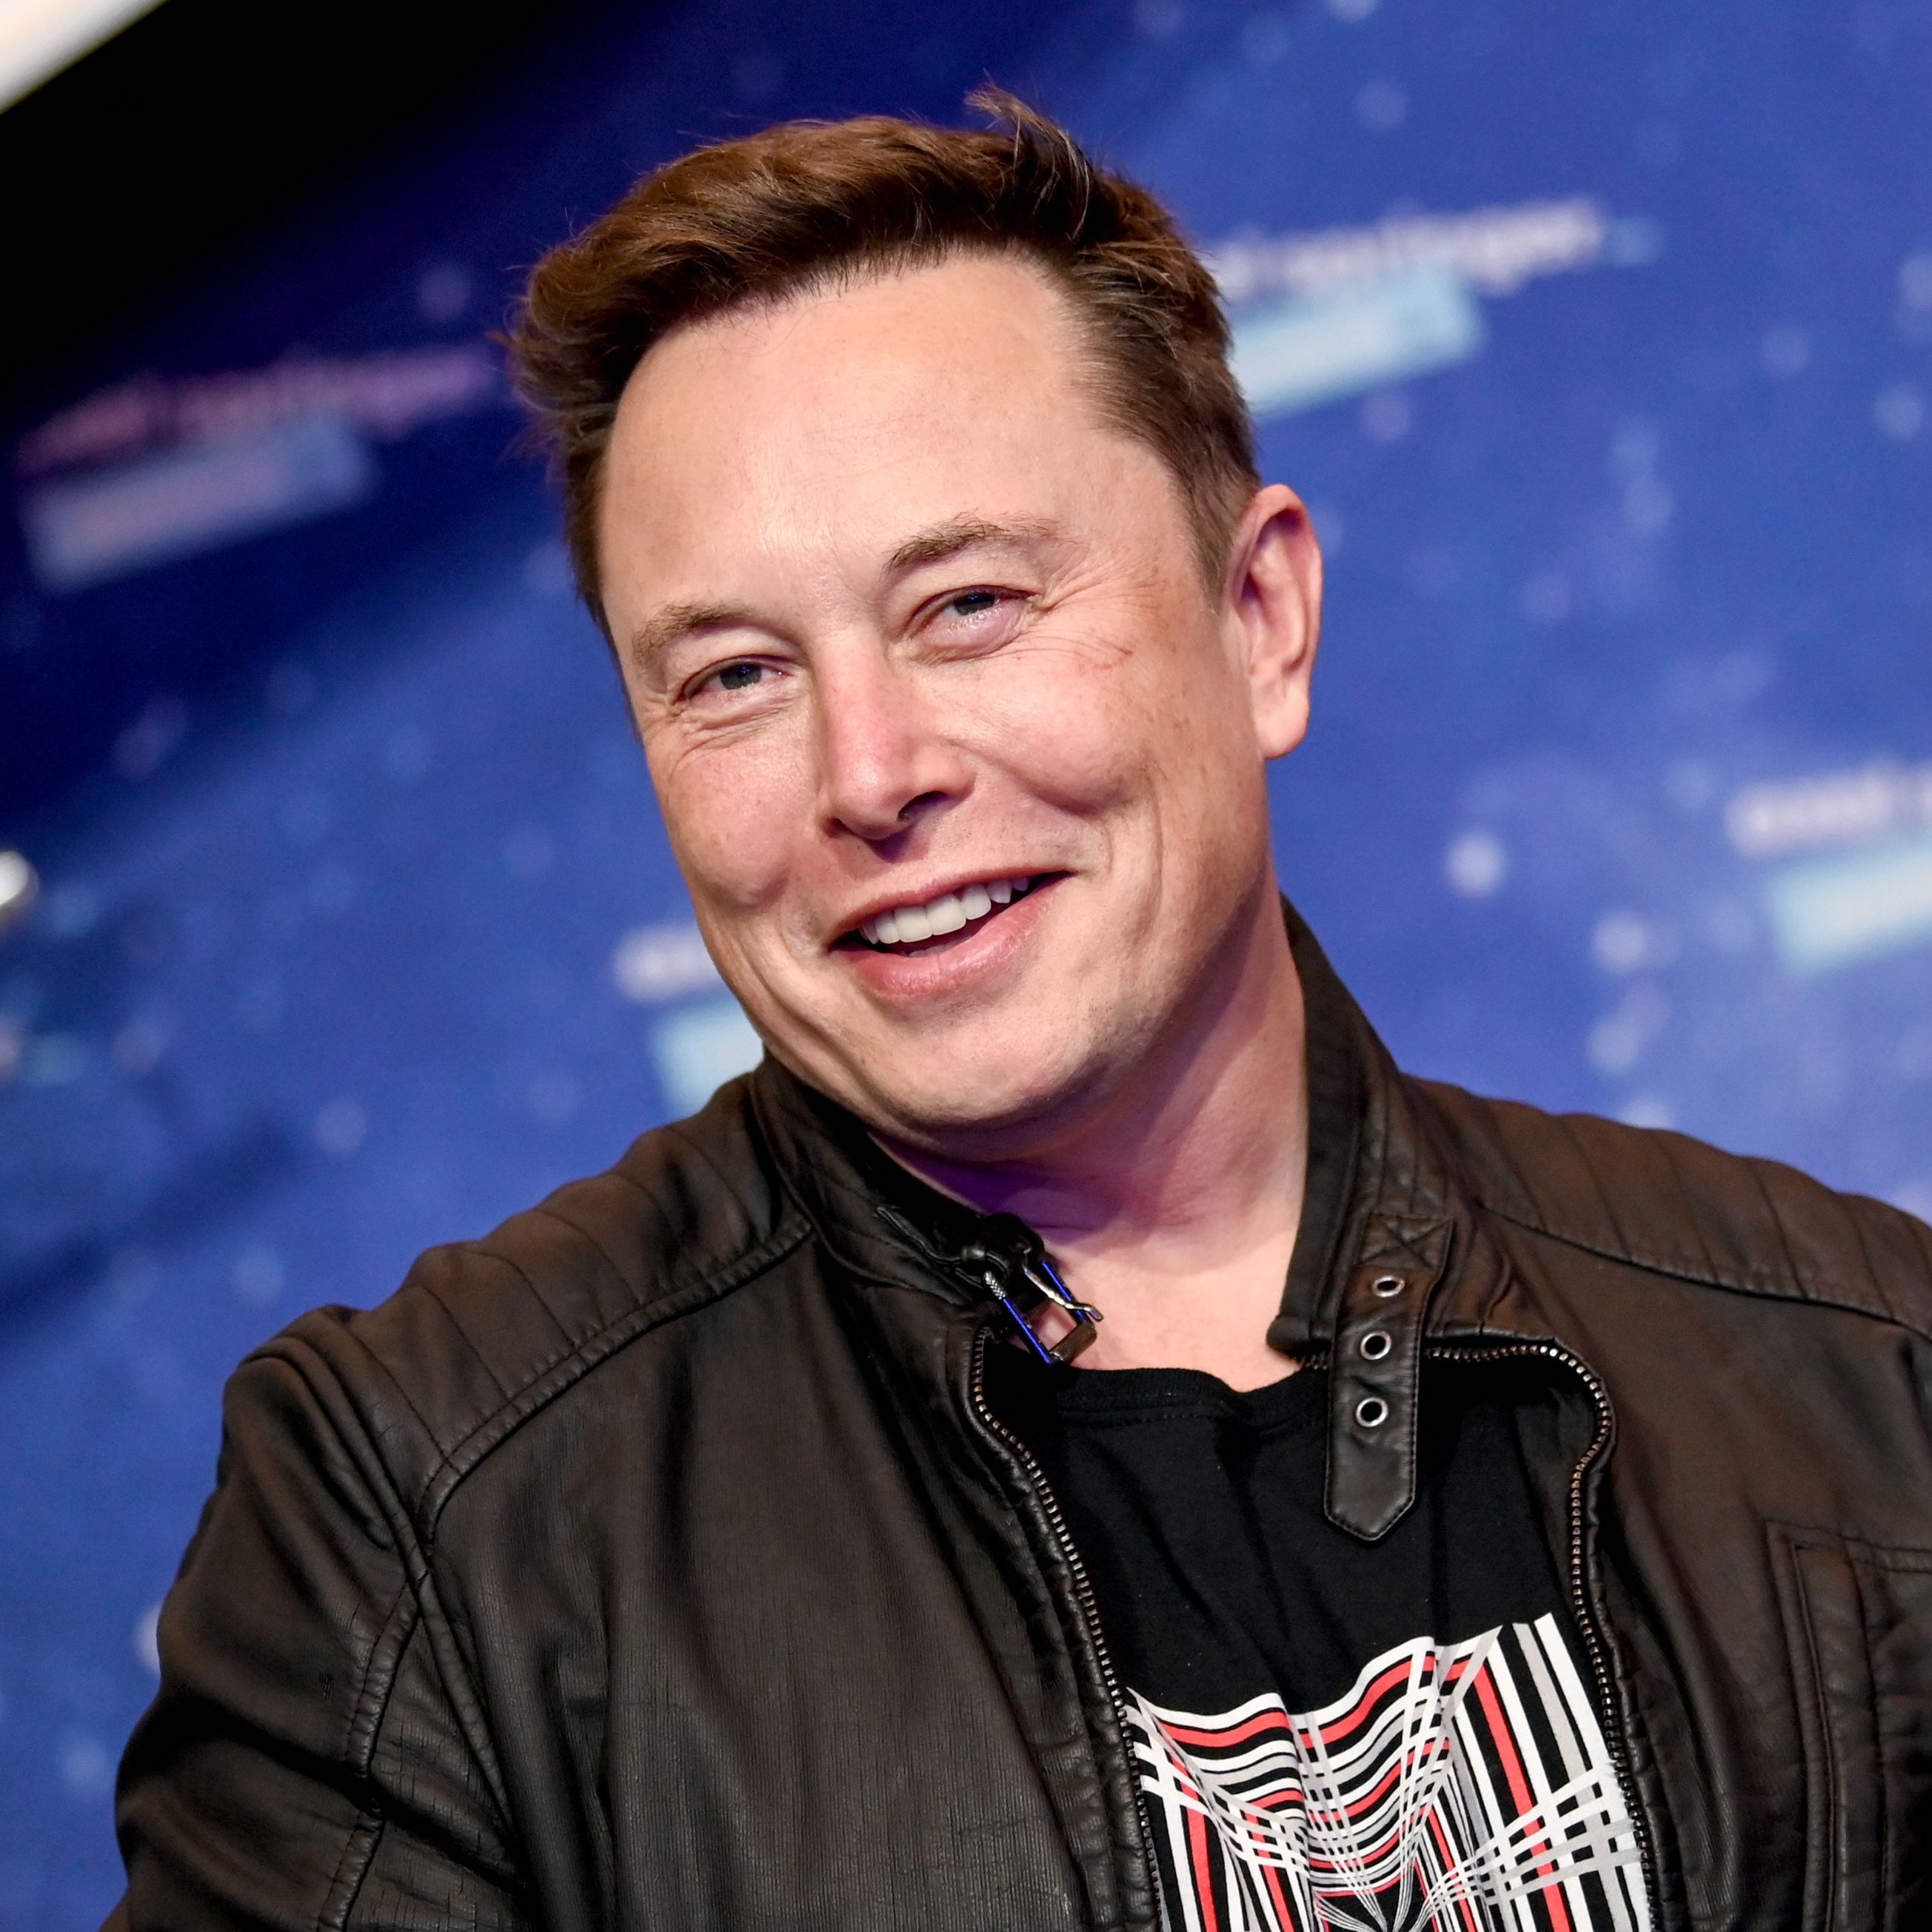 Elon Musk is no longer the world's richest person, falls behind